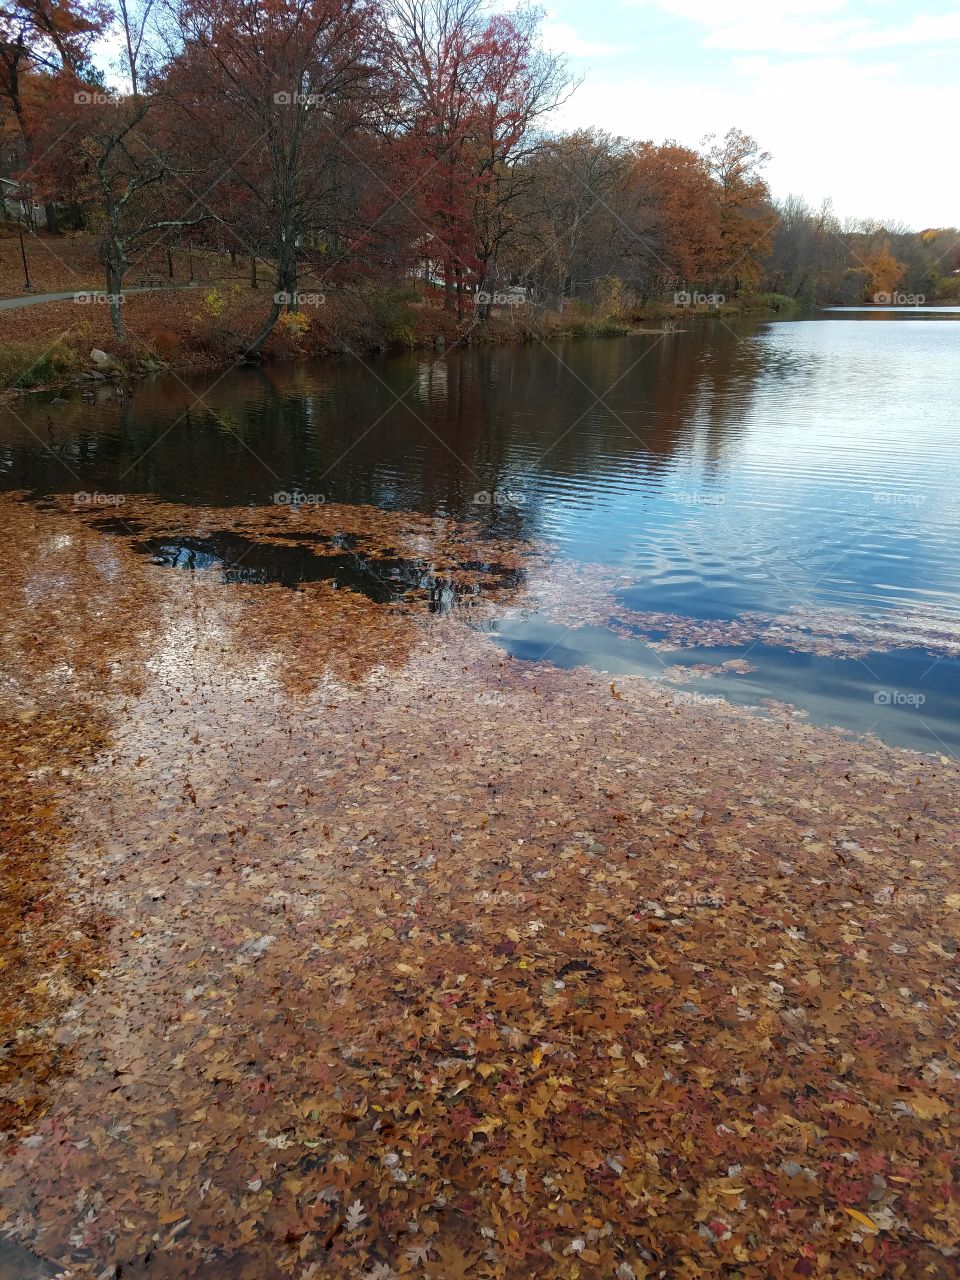 Leaves submerged in the water